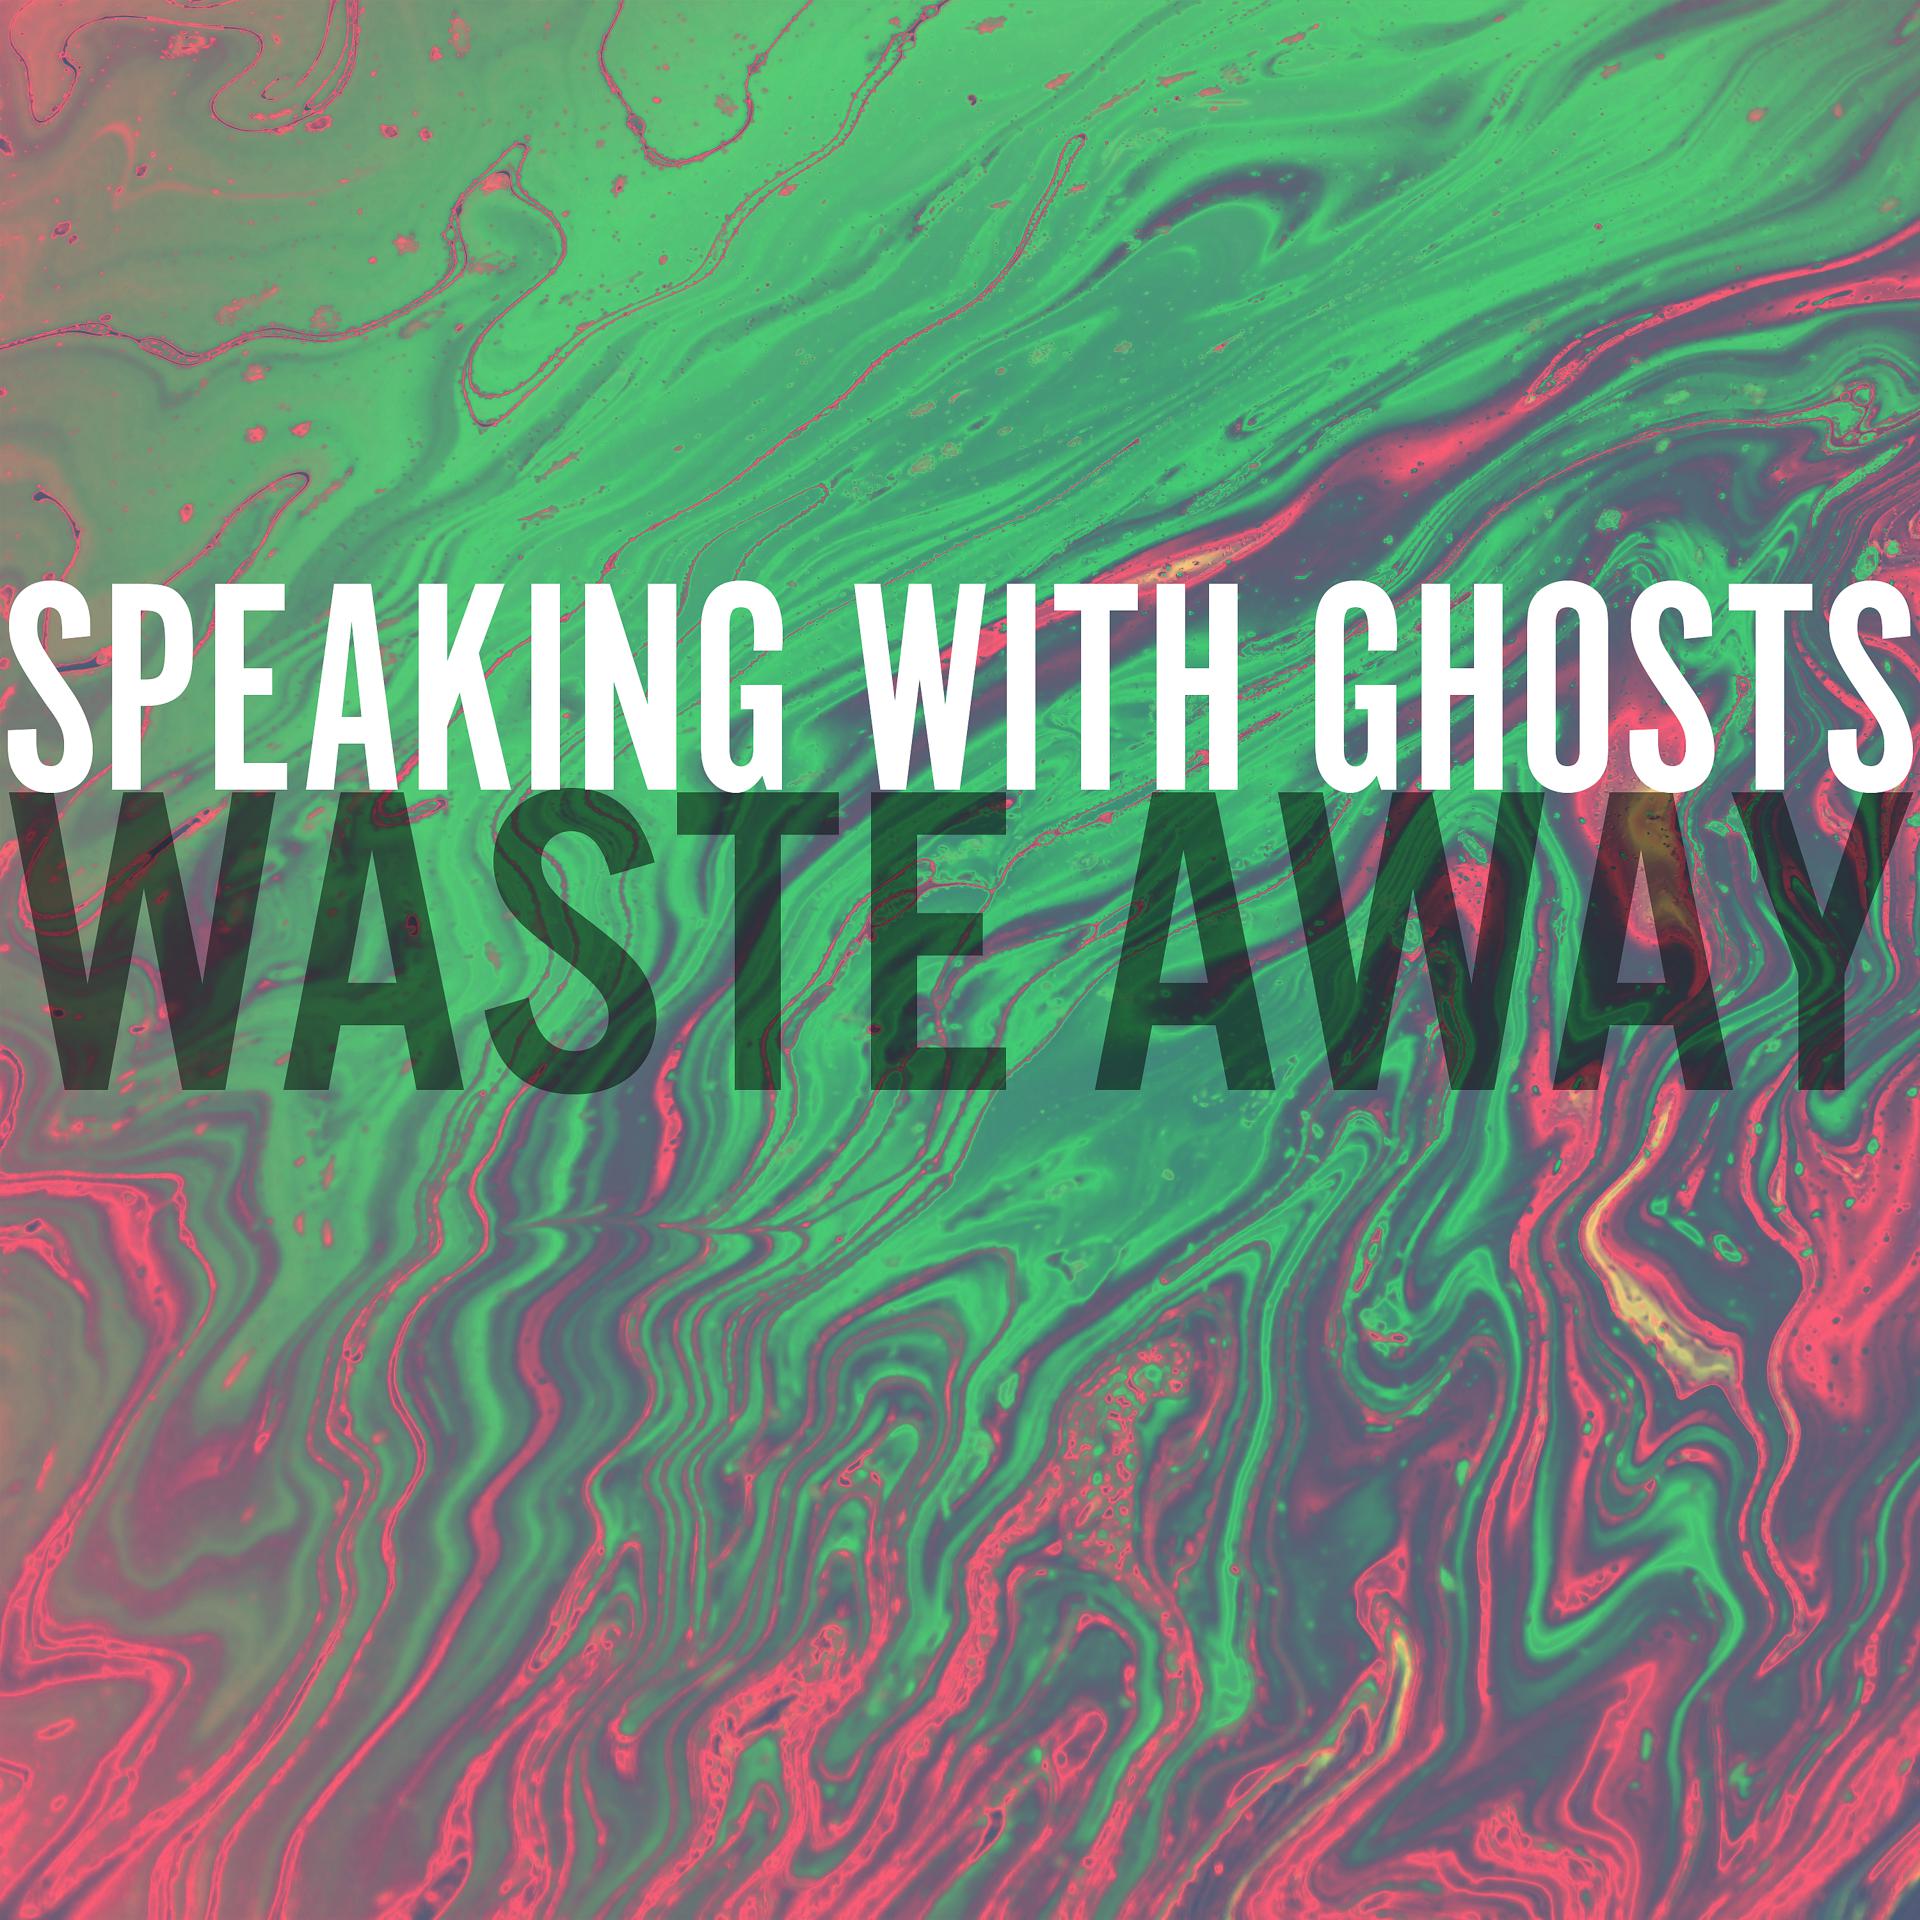 Waste away. Speaking with Ghosts. Waste обложка. Ghost waste. Картинки Ghost waste.